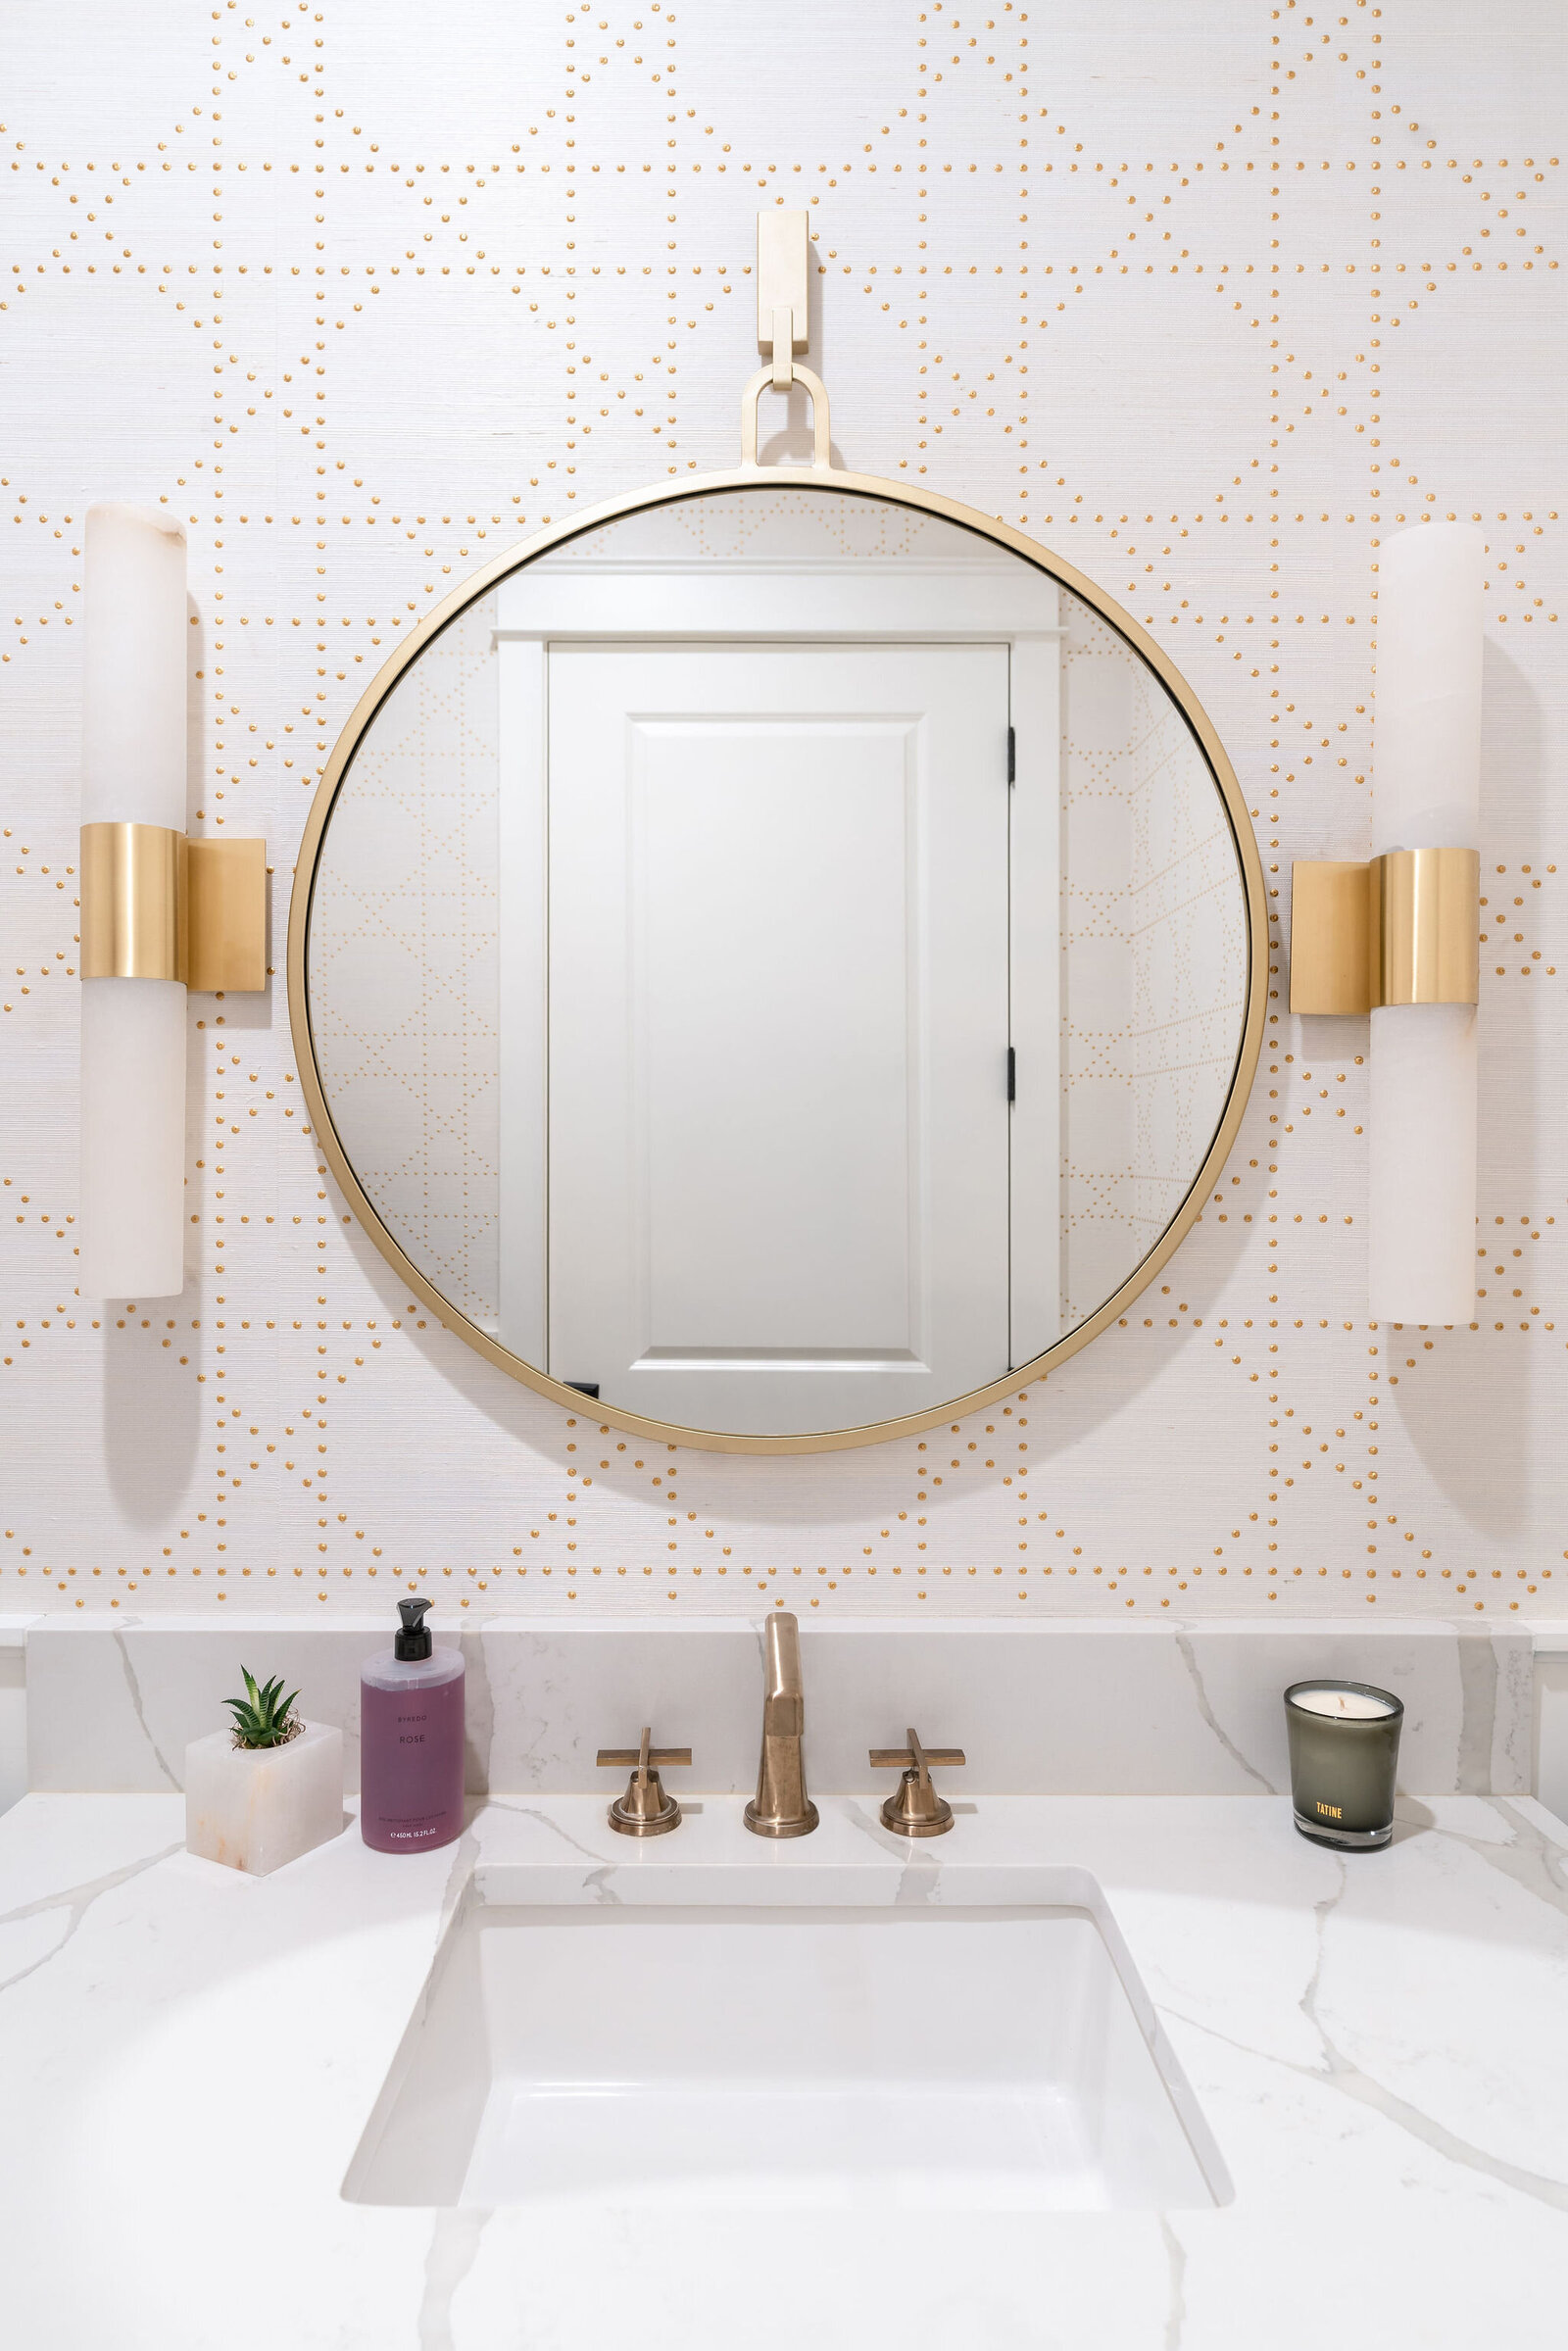 NuelaDesign_Gold and White Wallpaper_Bathroom